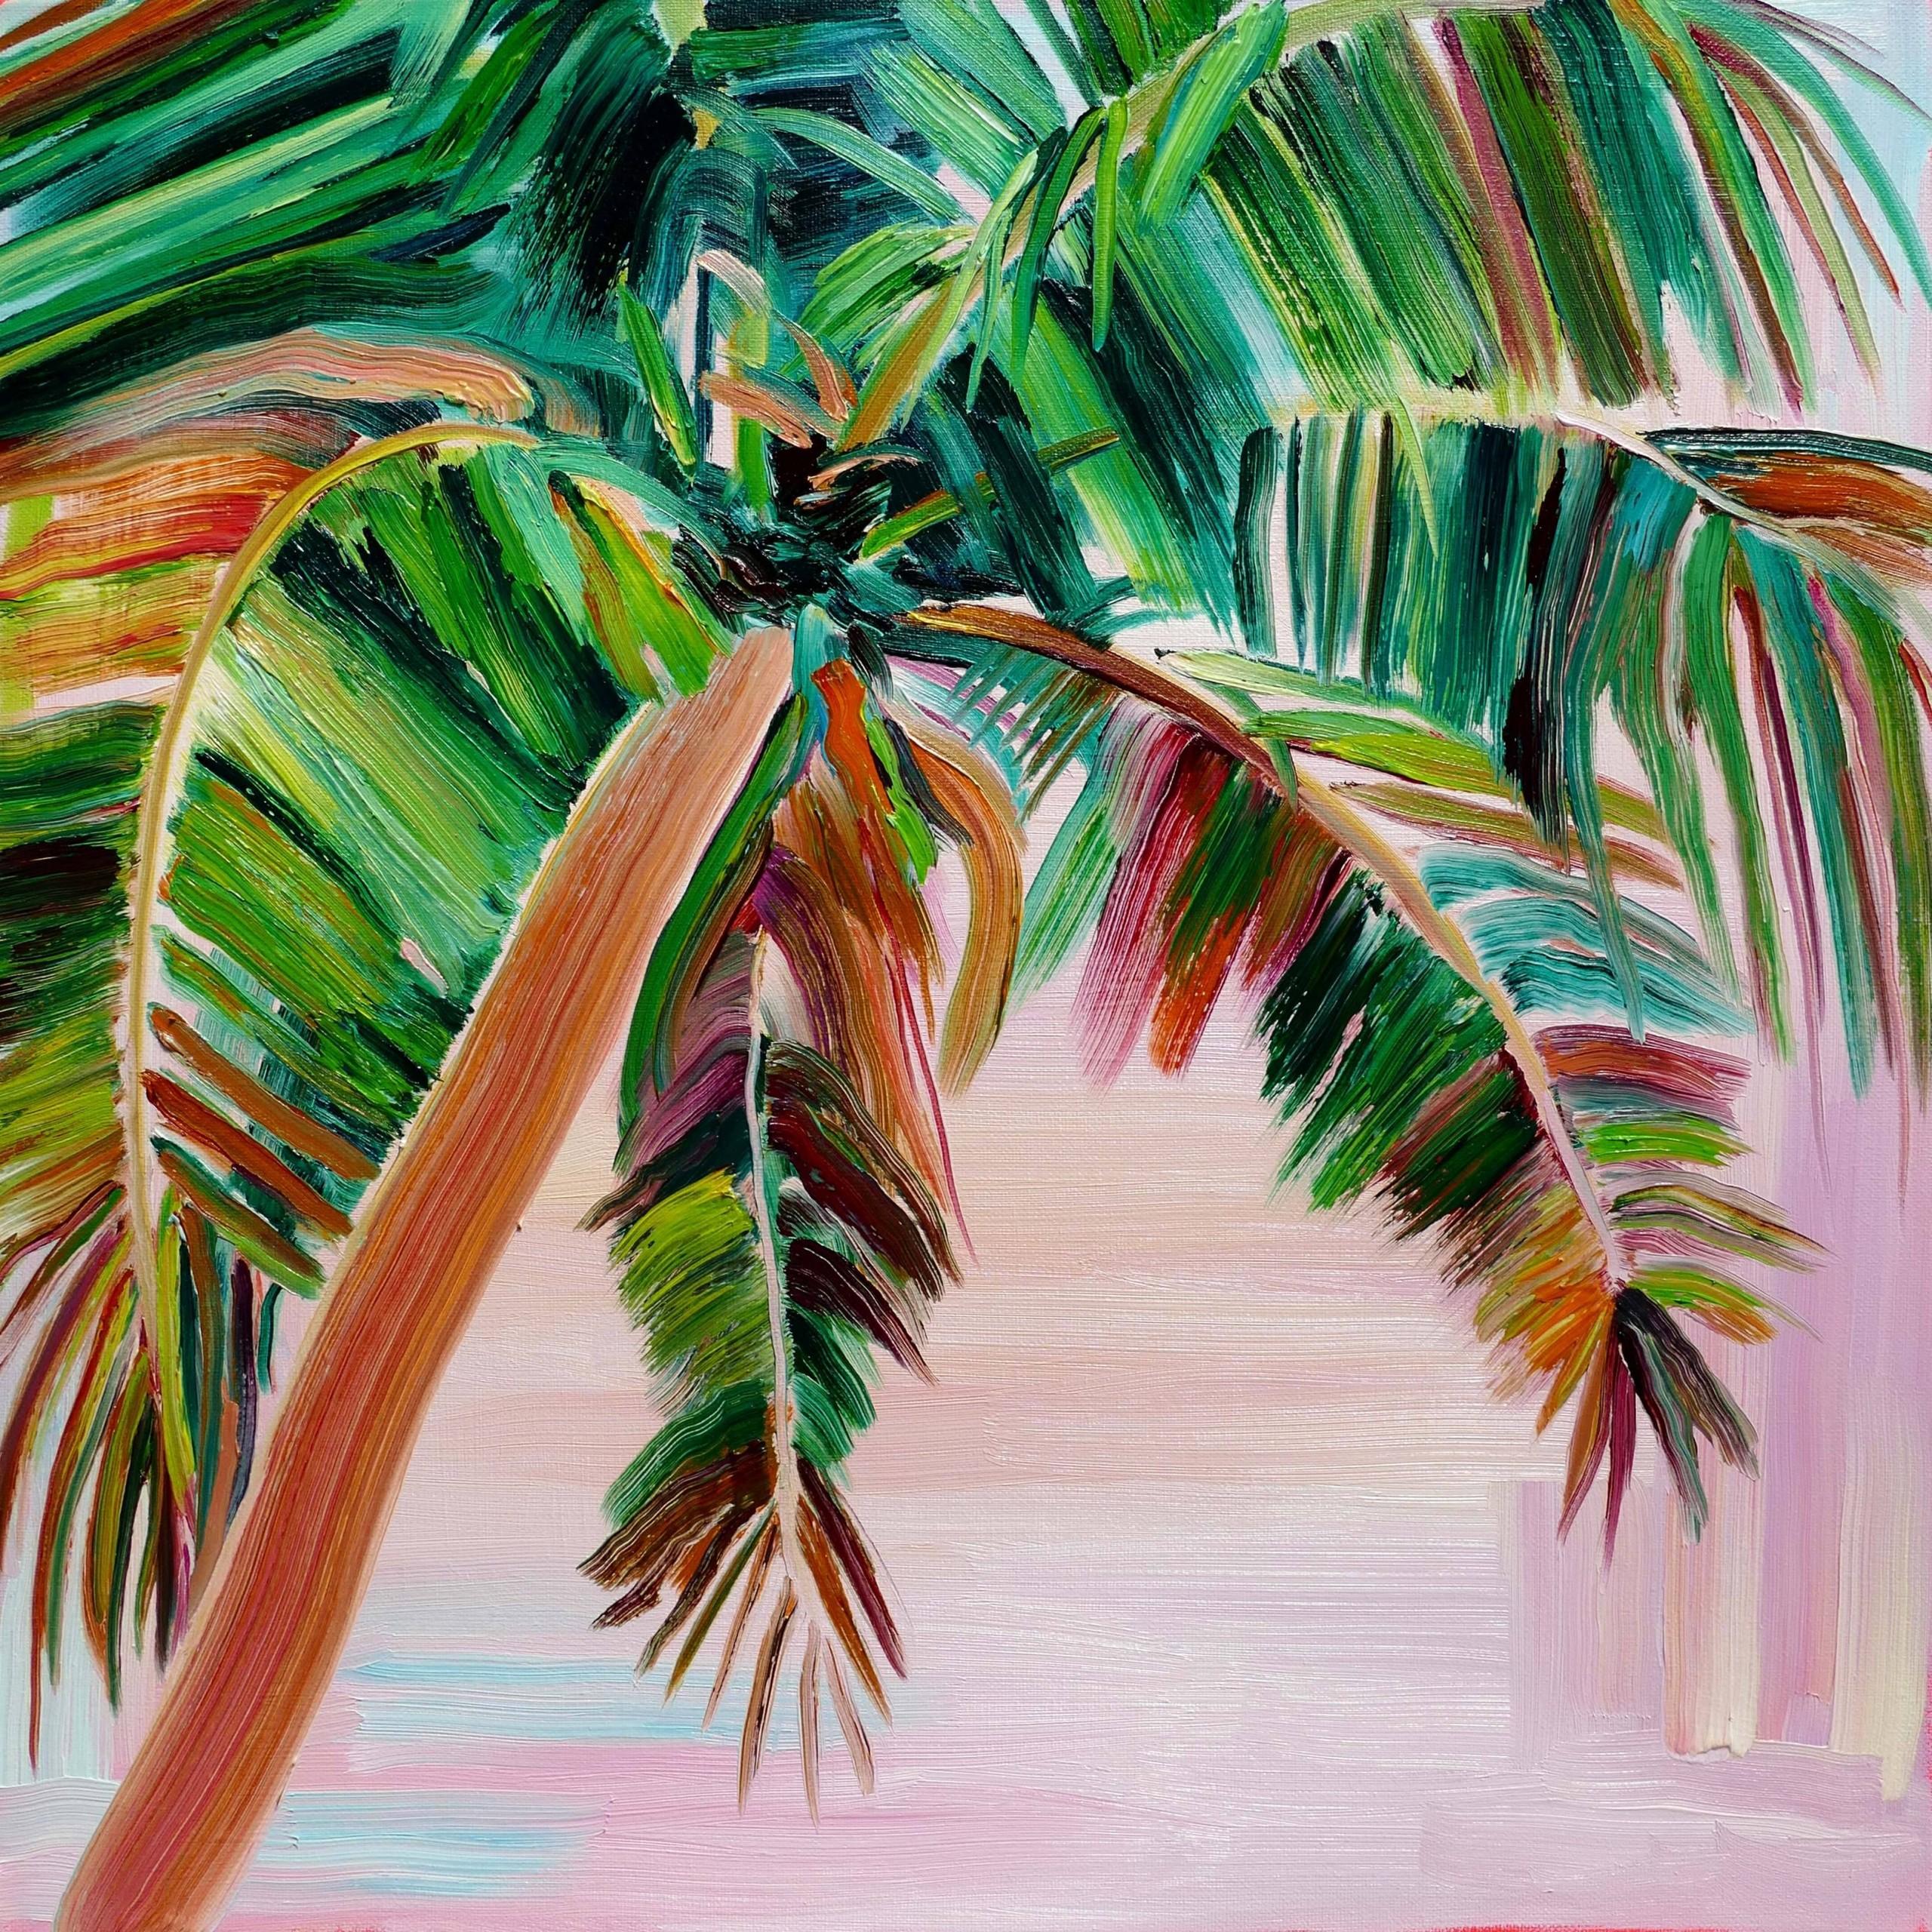 Anjuna By Alanna Eakin [2020]

Anjuna is an original oil painting by Alanna Eakin. Painted during the summer just after the first lockdown when everyone was dreaming of tropical scenery.

Additional Information:
original
Oil Paint on Canvas
Image